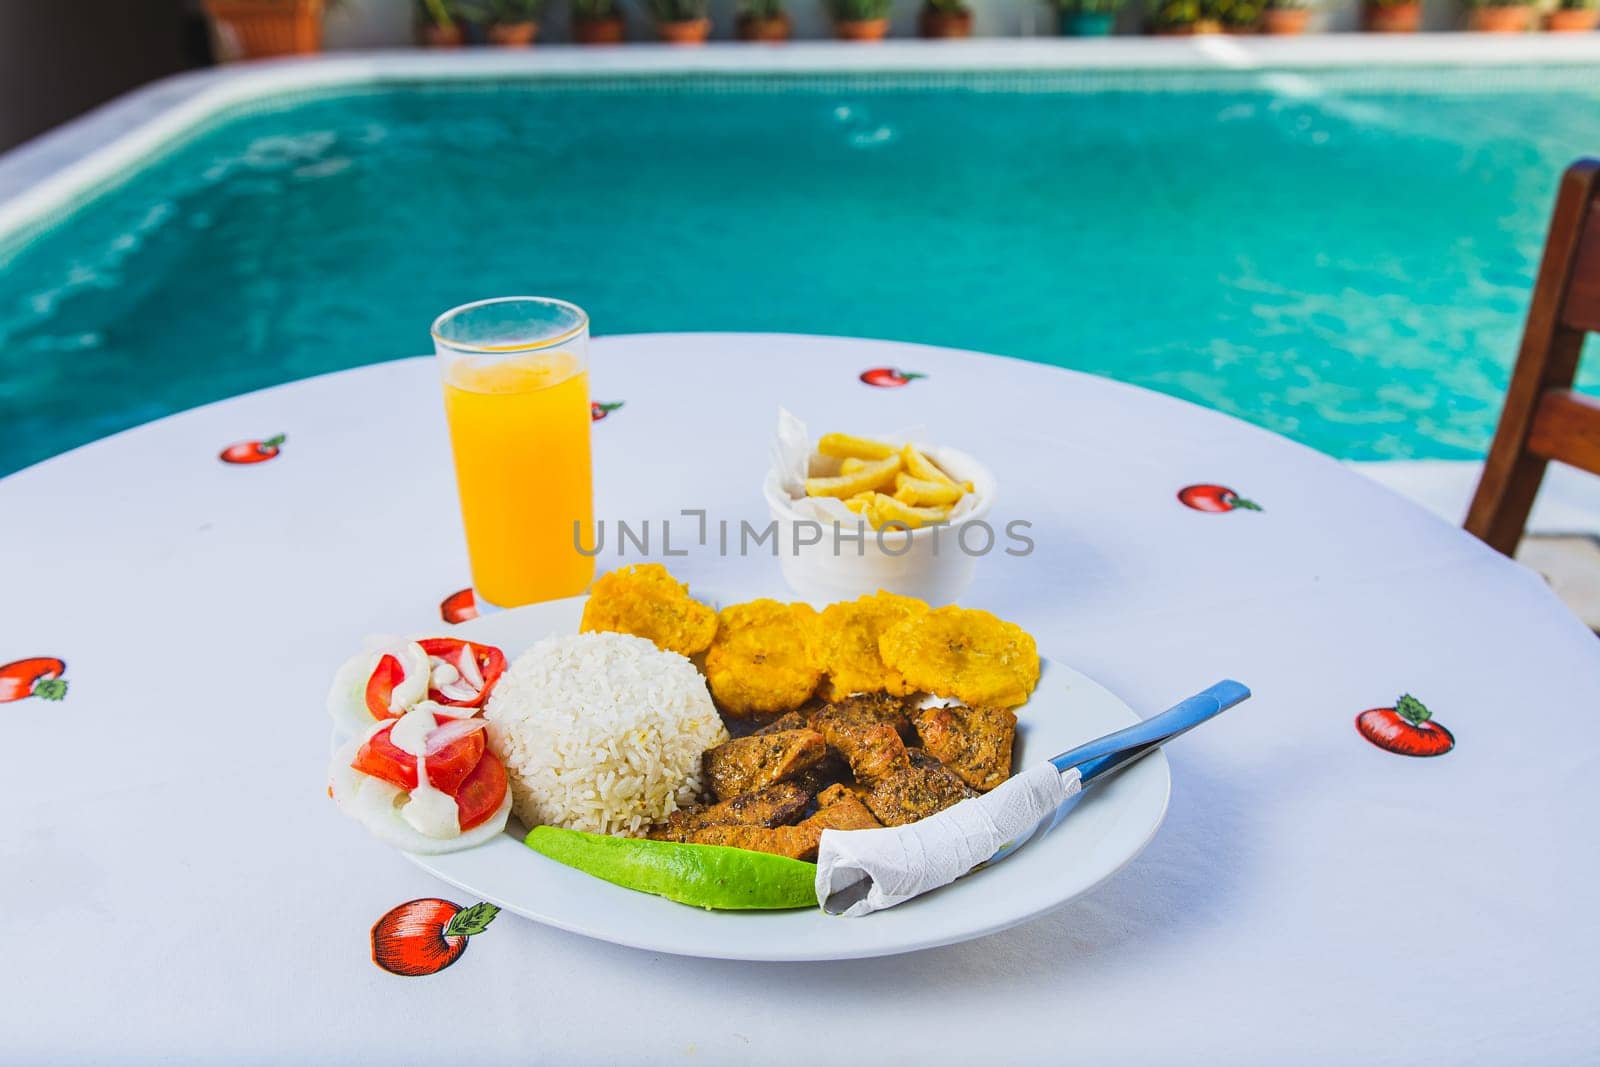 Delicious breakfast near a crystal clear pool. Traditional breakfast with orange juice served near a swimming pool